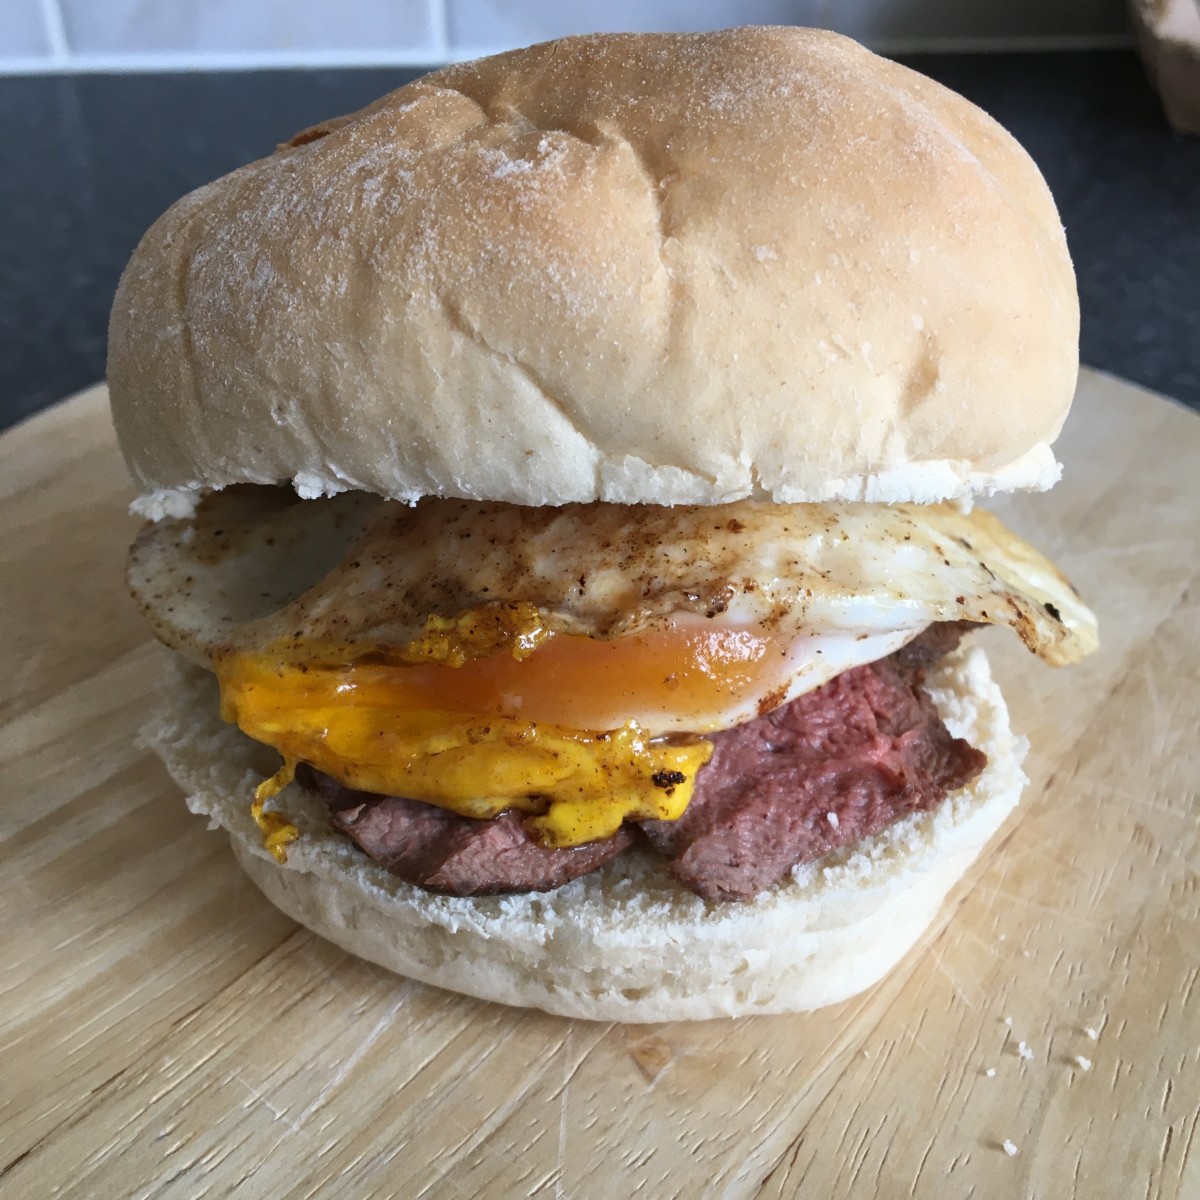 Fried duck egg and pigeon breast sandwich is one of the recipes featured on this page